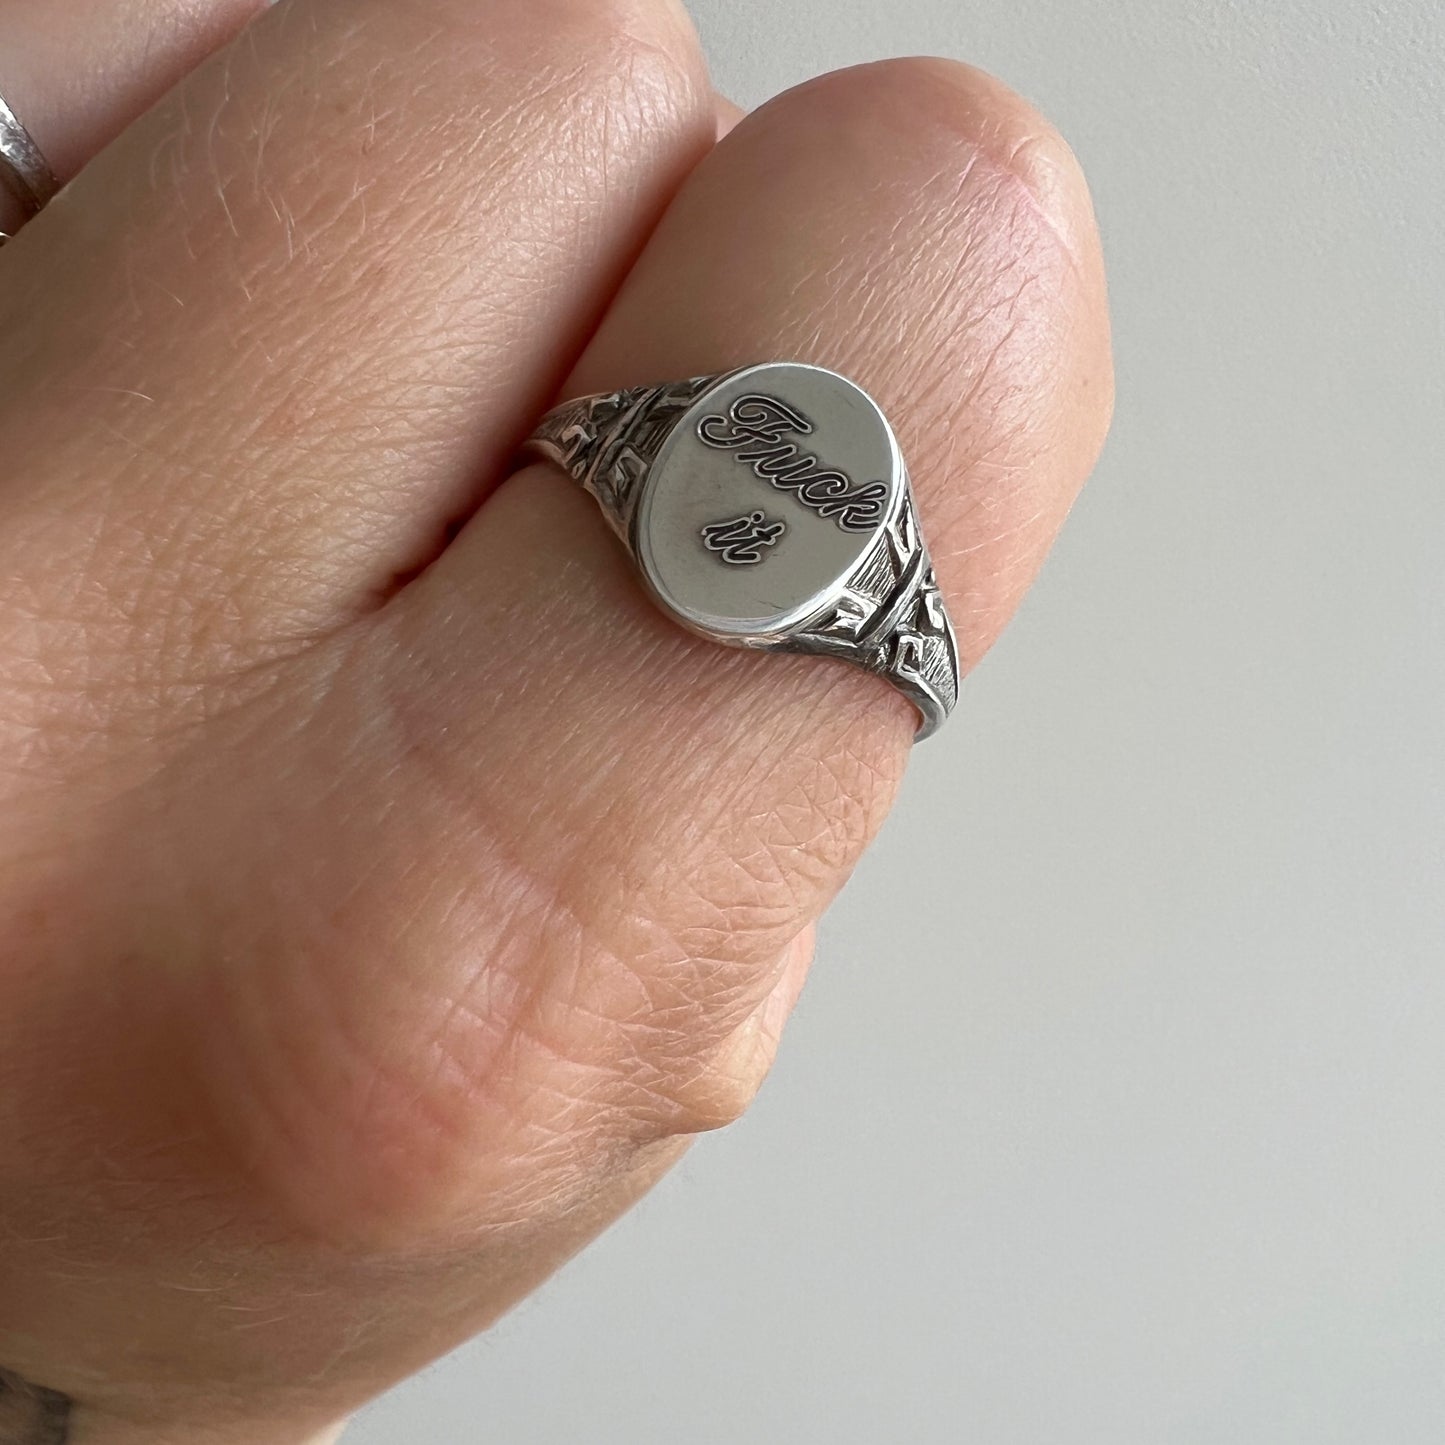 reimagined V I N T A G E // f*ck it / sterling silver signet ring with freshly engraved sentiment / size 8